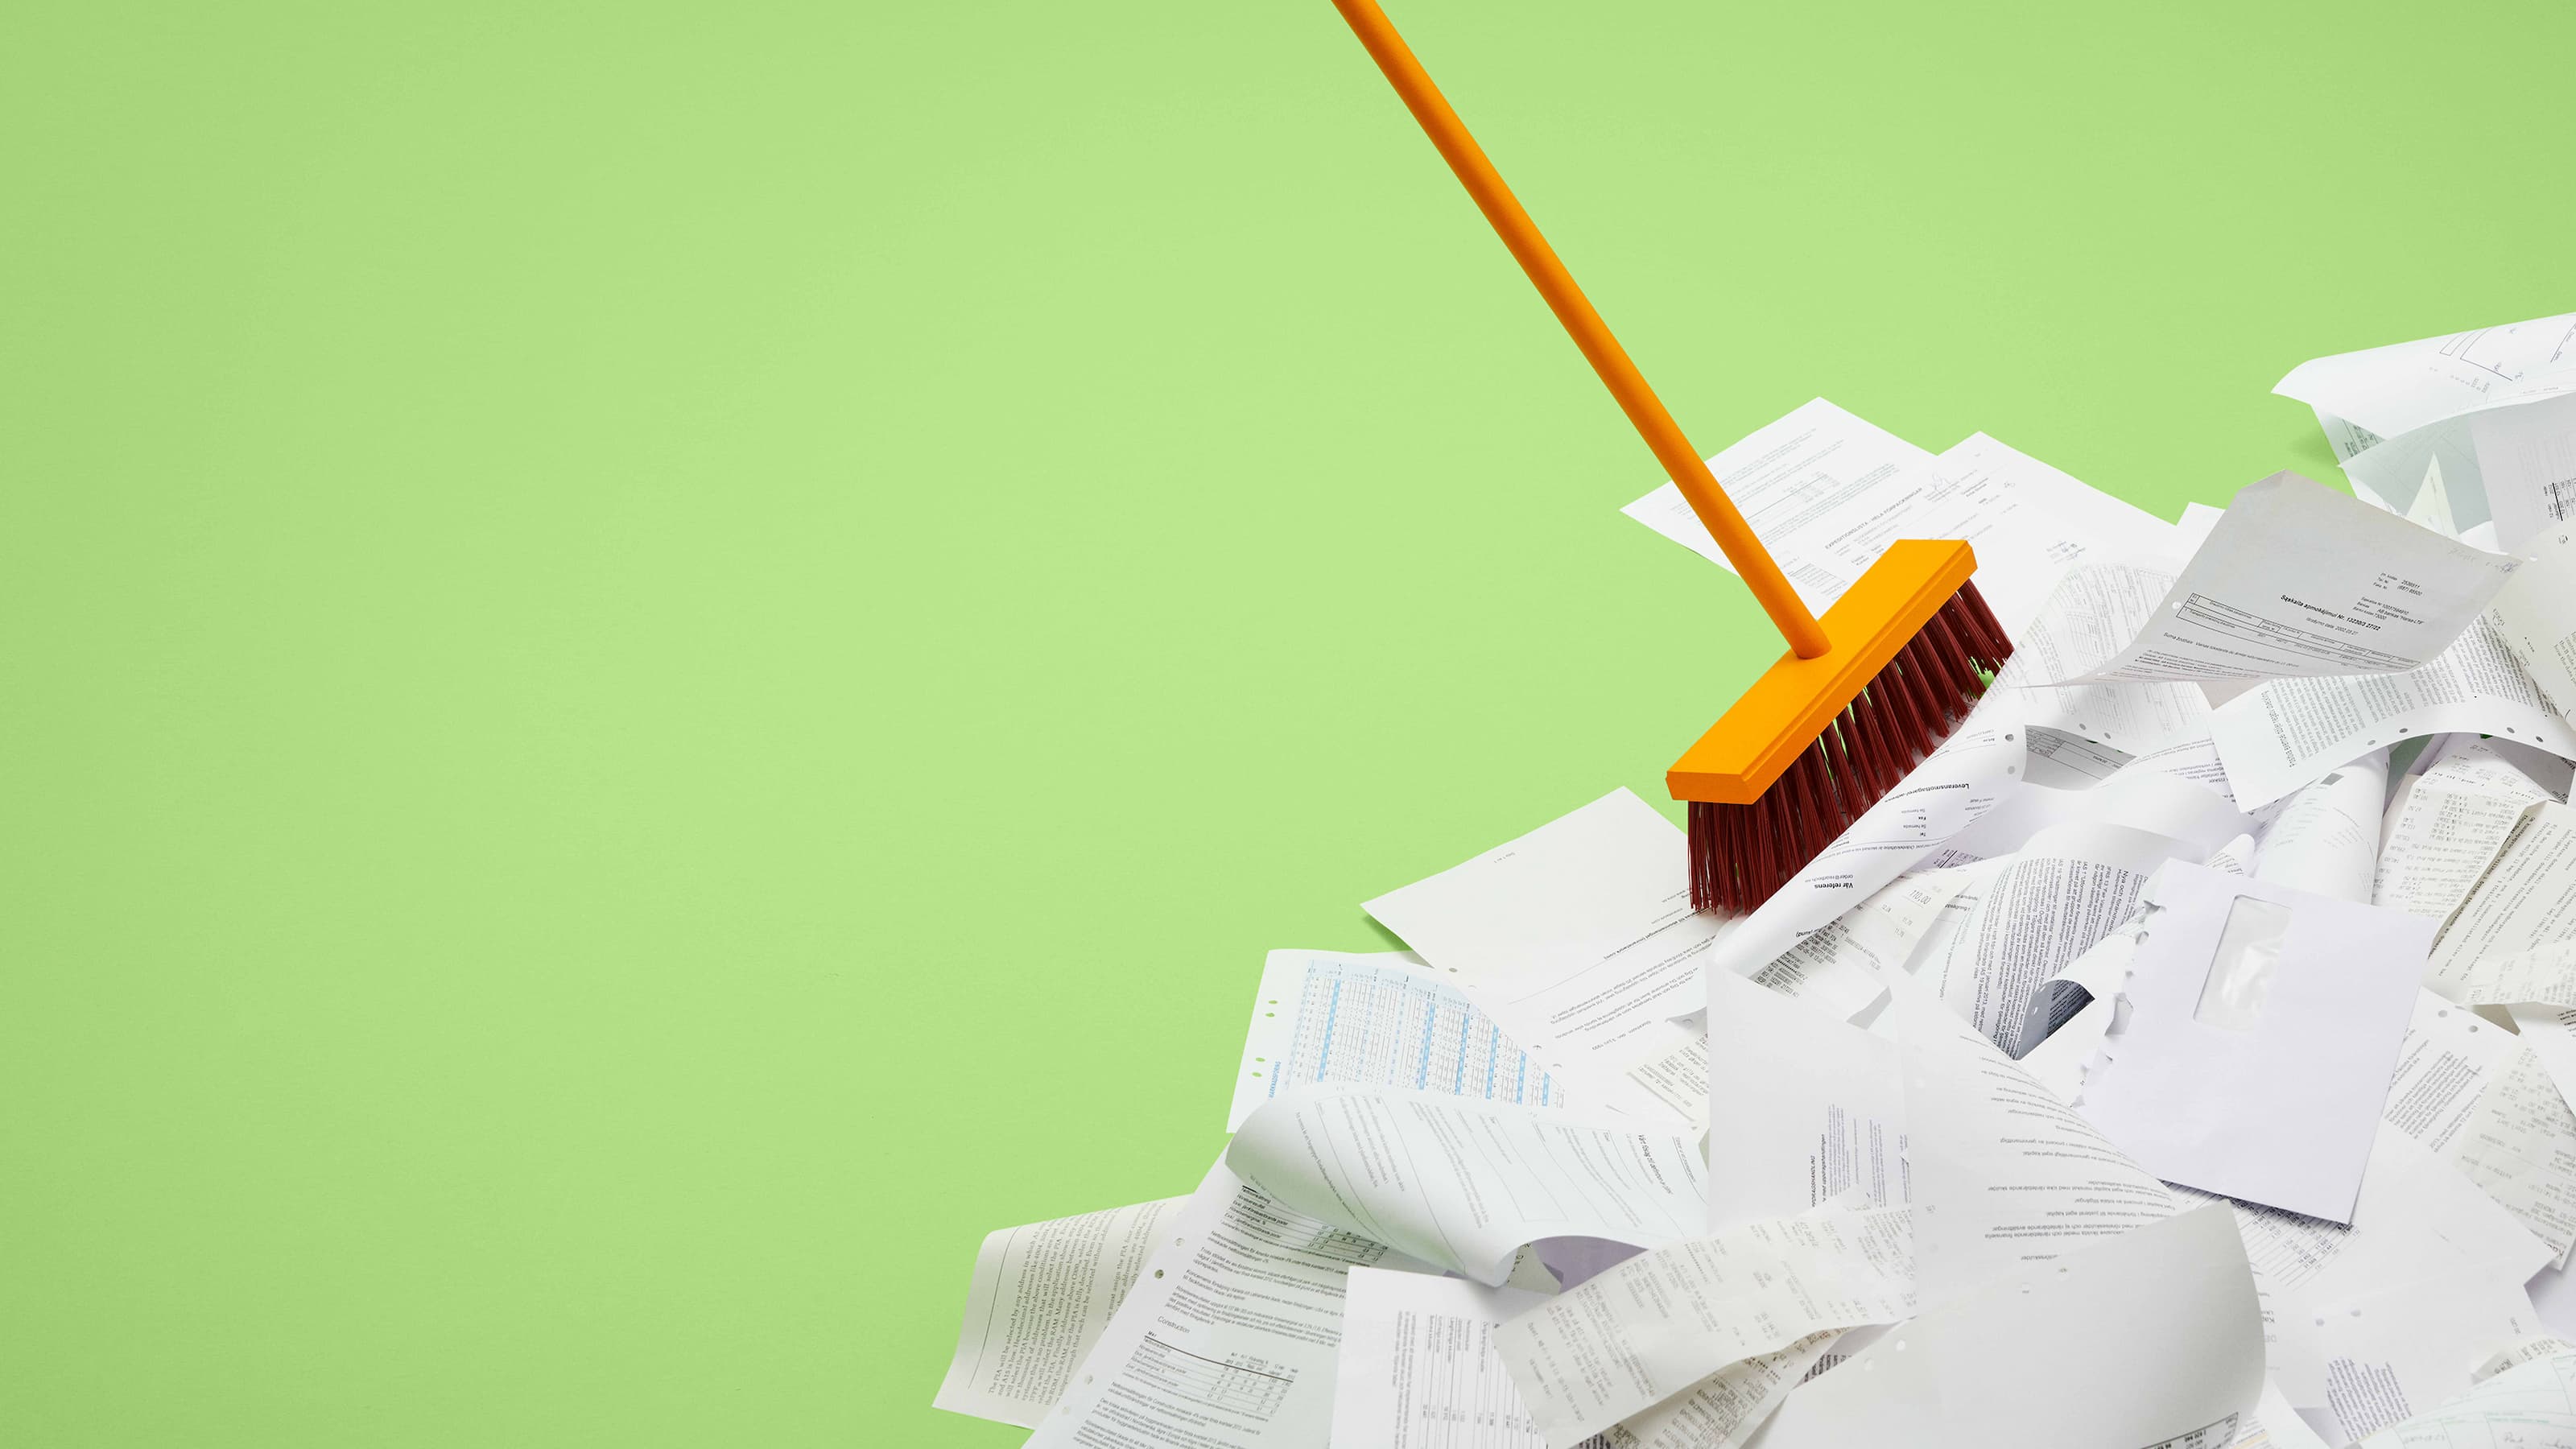 A broom brushes away a messy pile of paper documents.